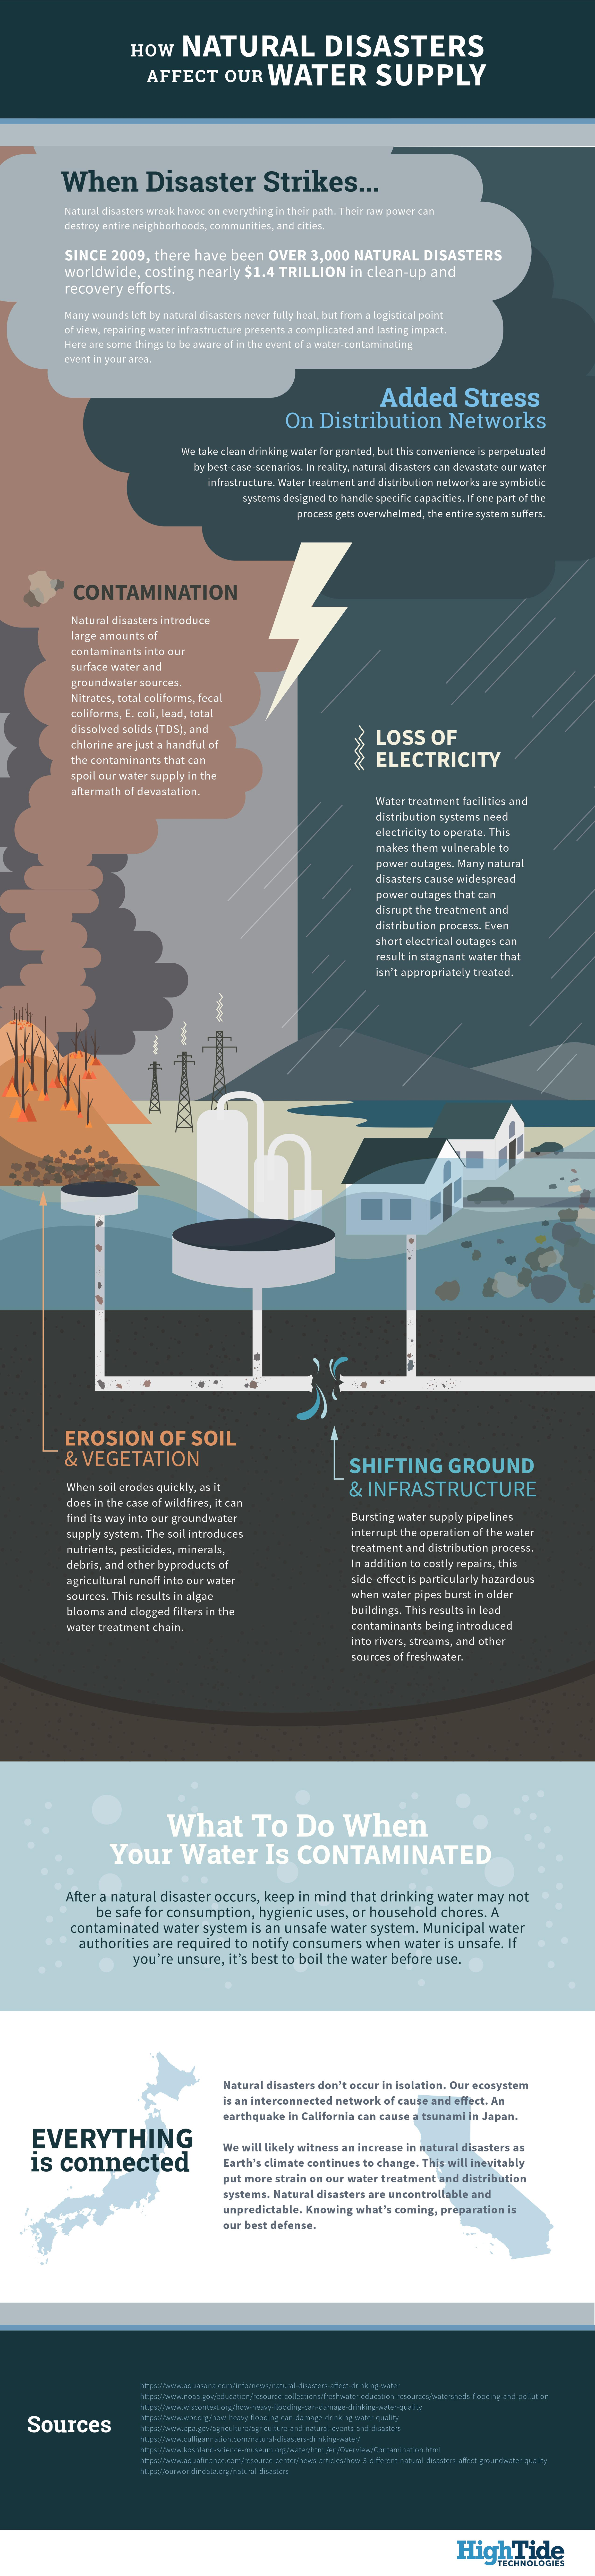 How Natural Disasters Affect Our Water Supply (infographic by High Tide Technologies